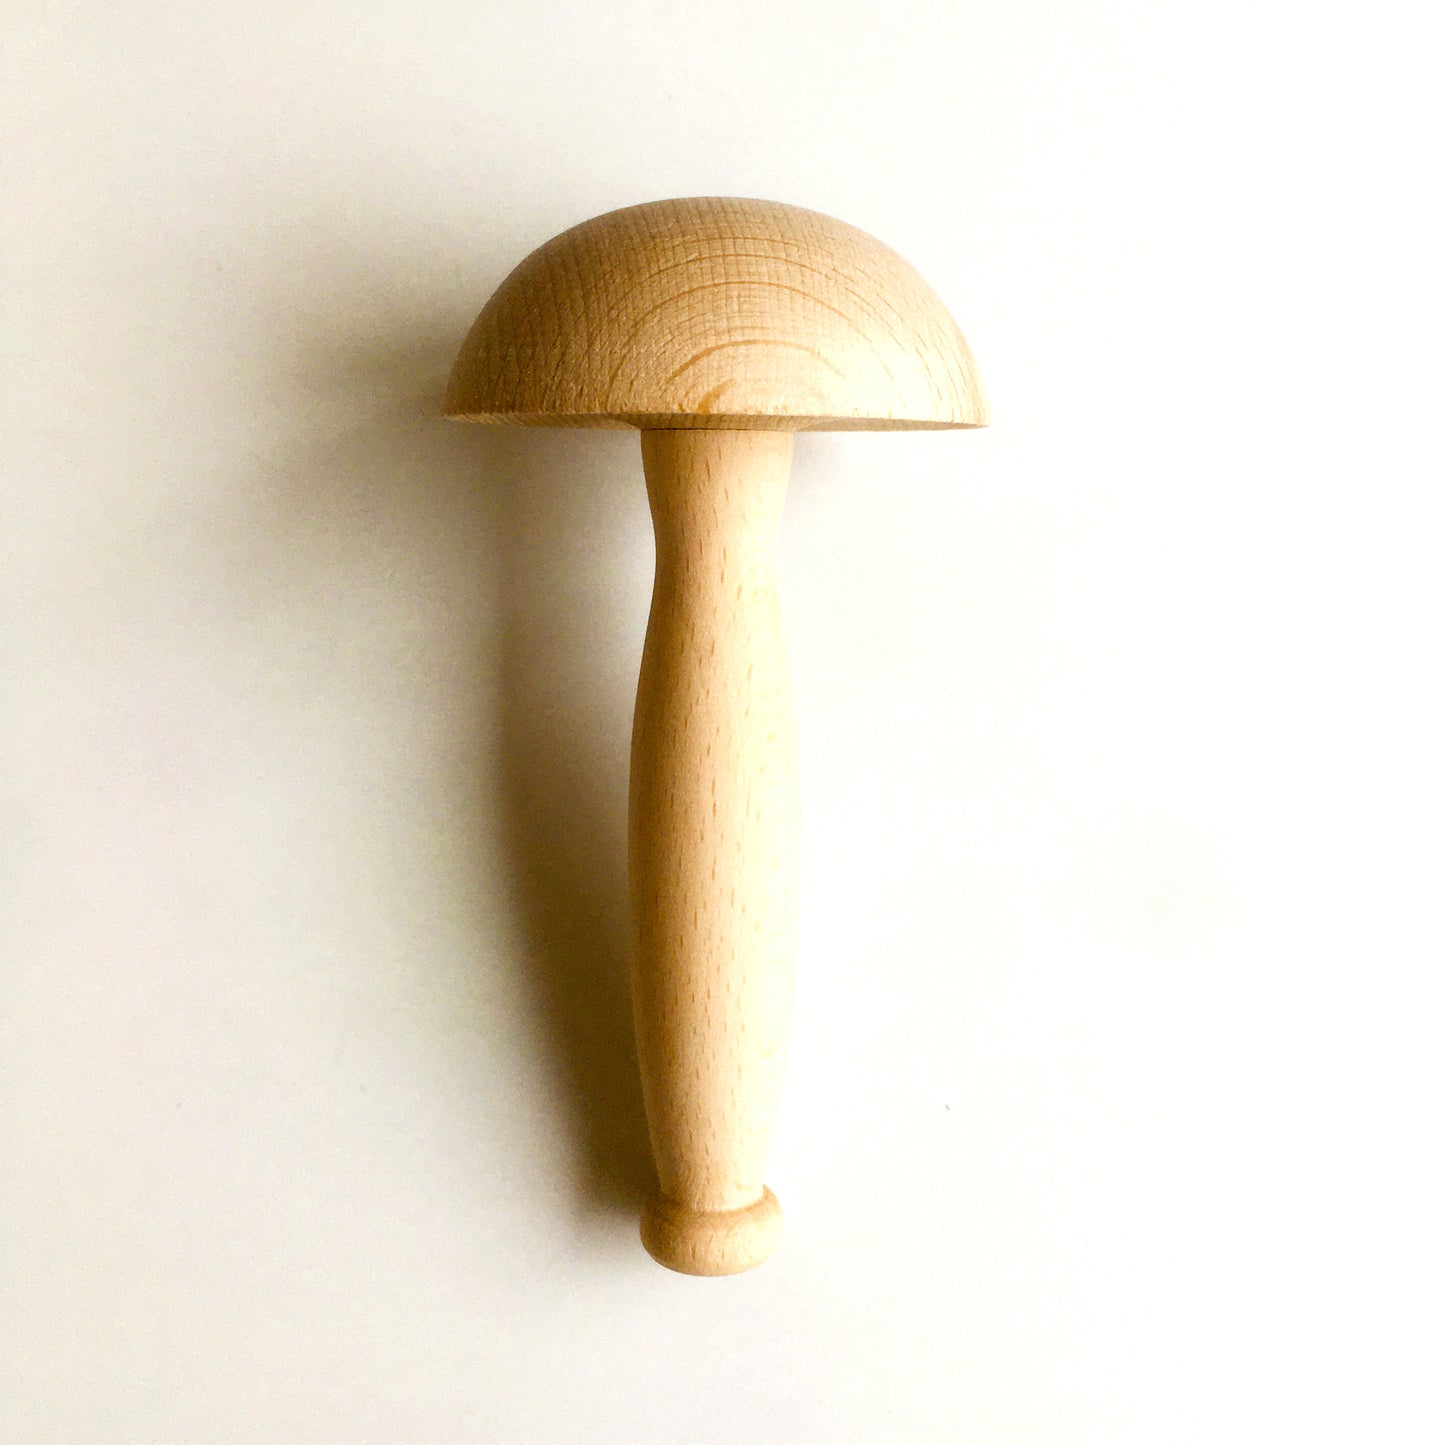 Organic shaped darning tool. Darning mushroom makes it easier to repair a hole in clothes. Darning egg is also available at toolly.